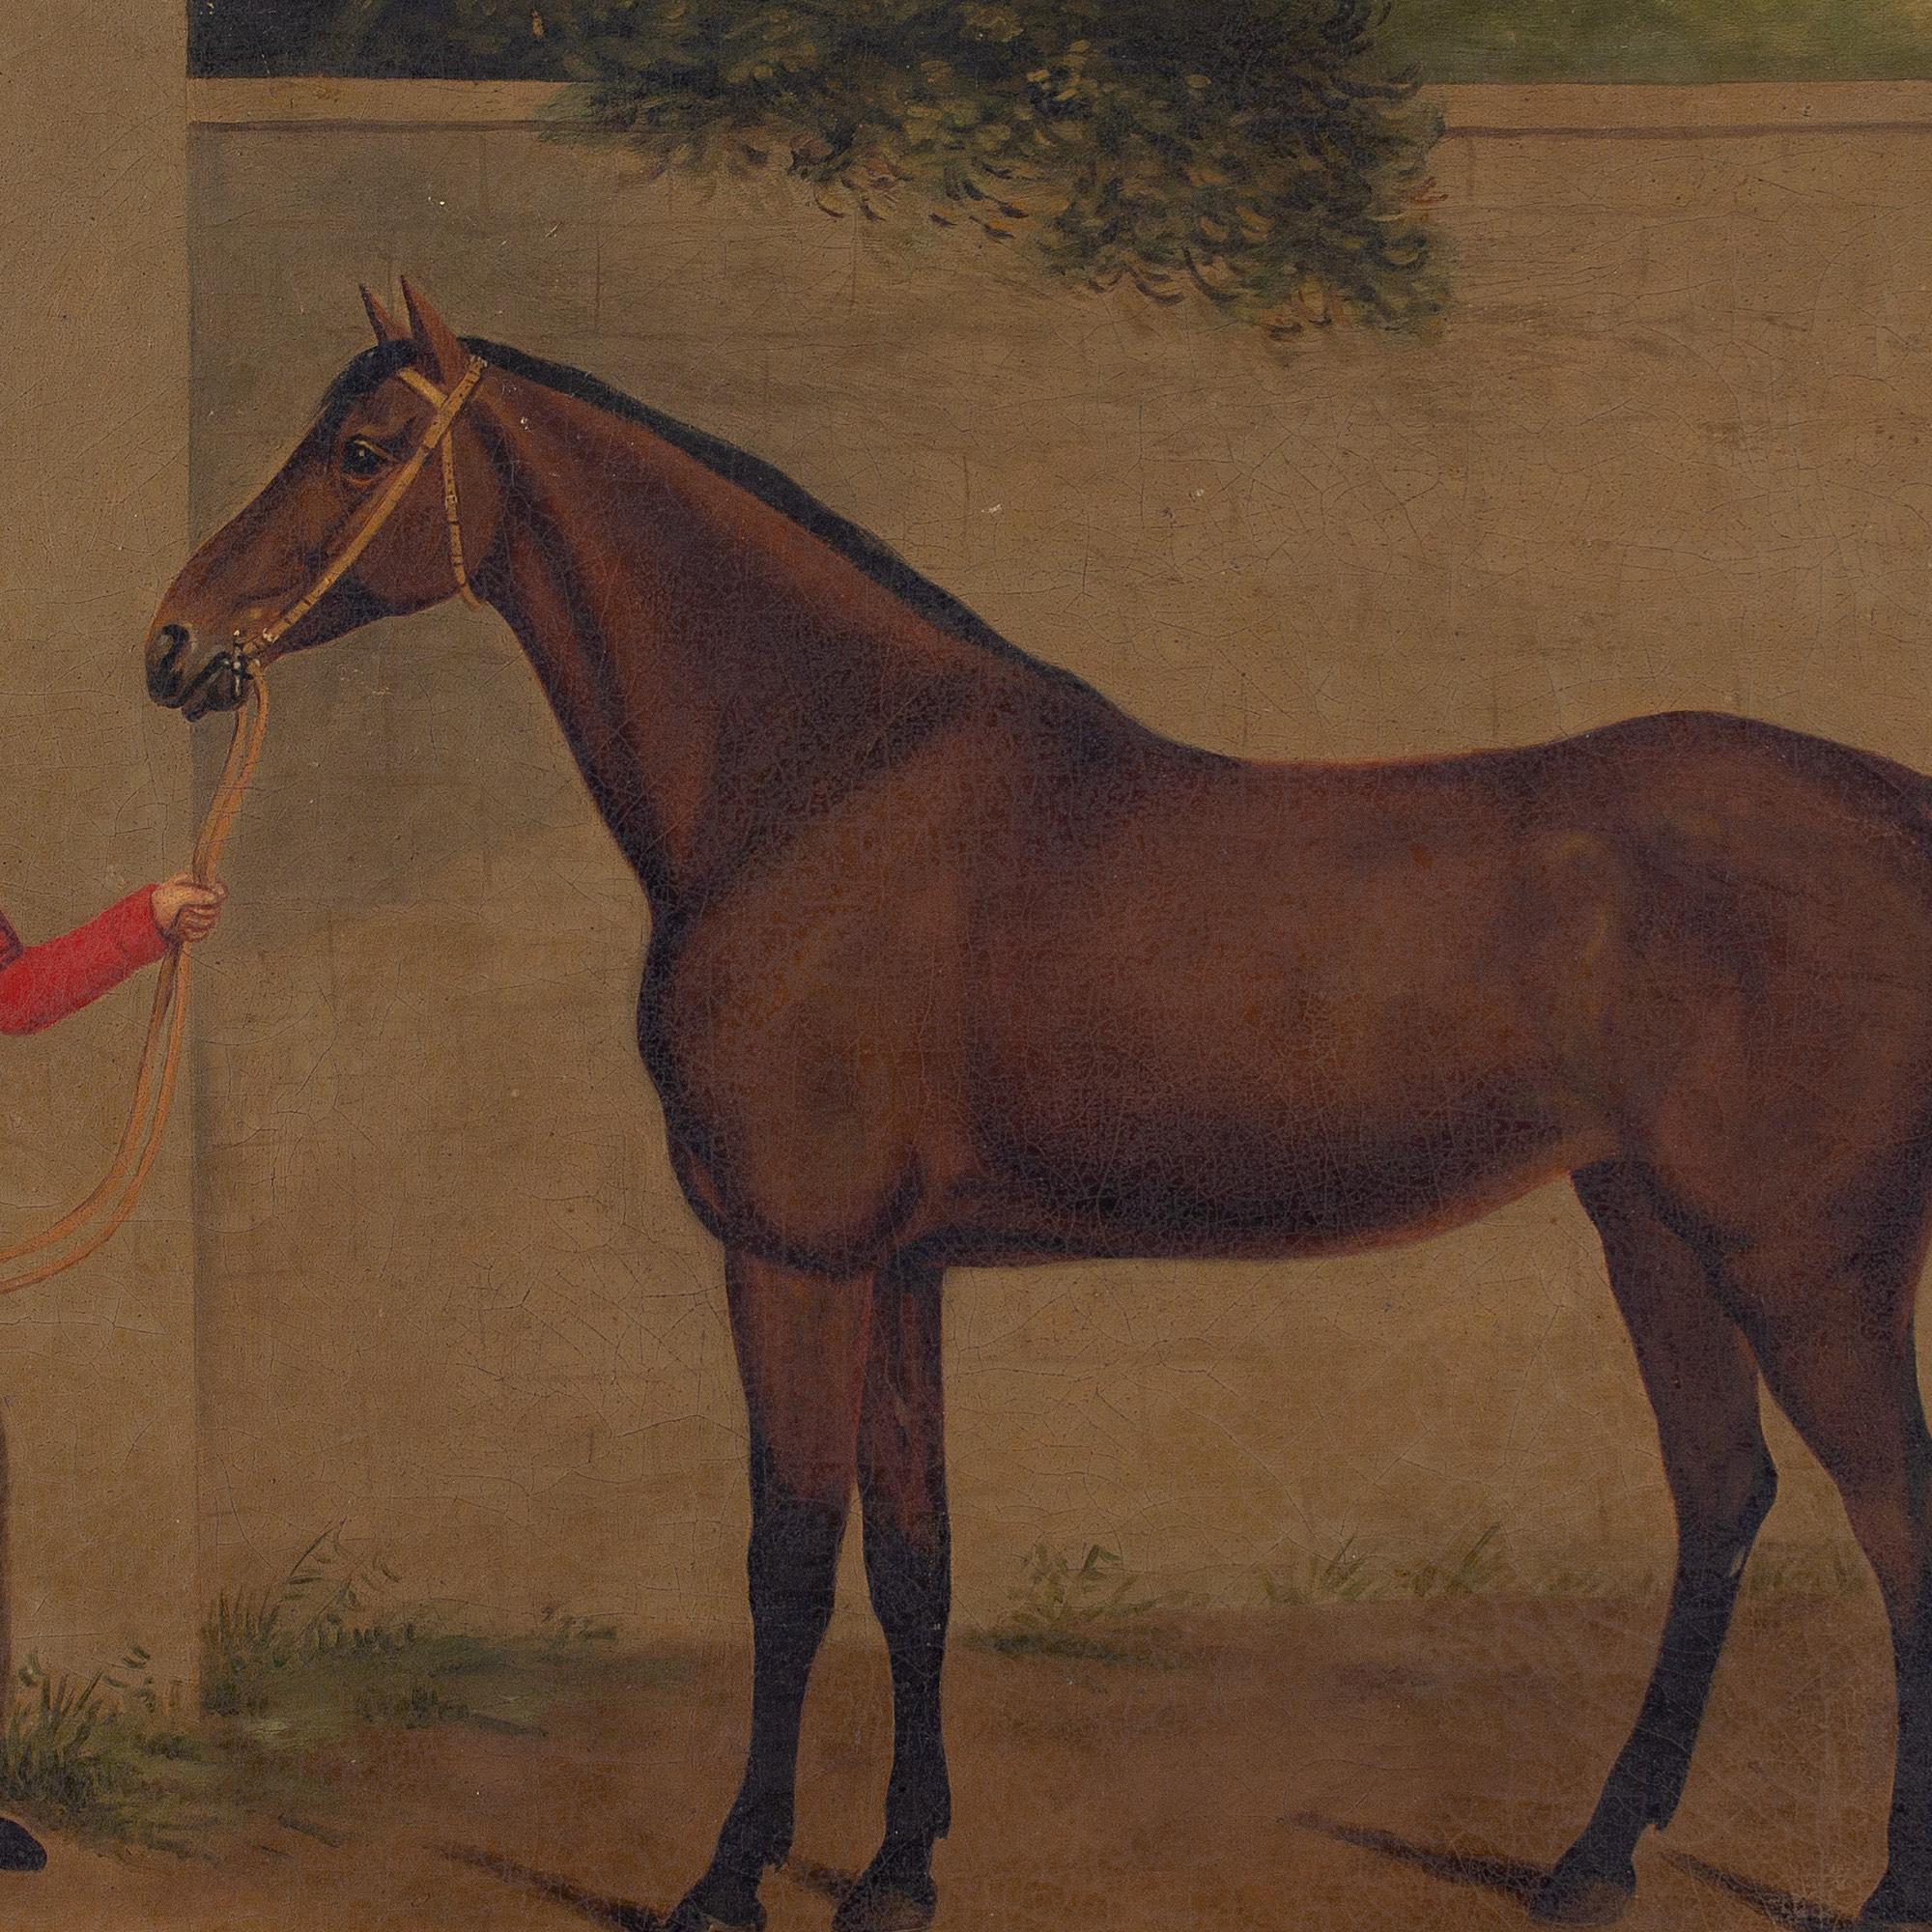 This early 19th-century oil painting by British artist I Moore depicts a horse with its dapper groom.

With his left hand clutching the reins, a smartly-attired young groom stands proudly alongside a bay mare. He’s dressed in a style befitting the